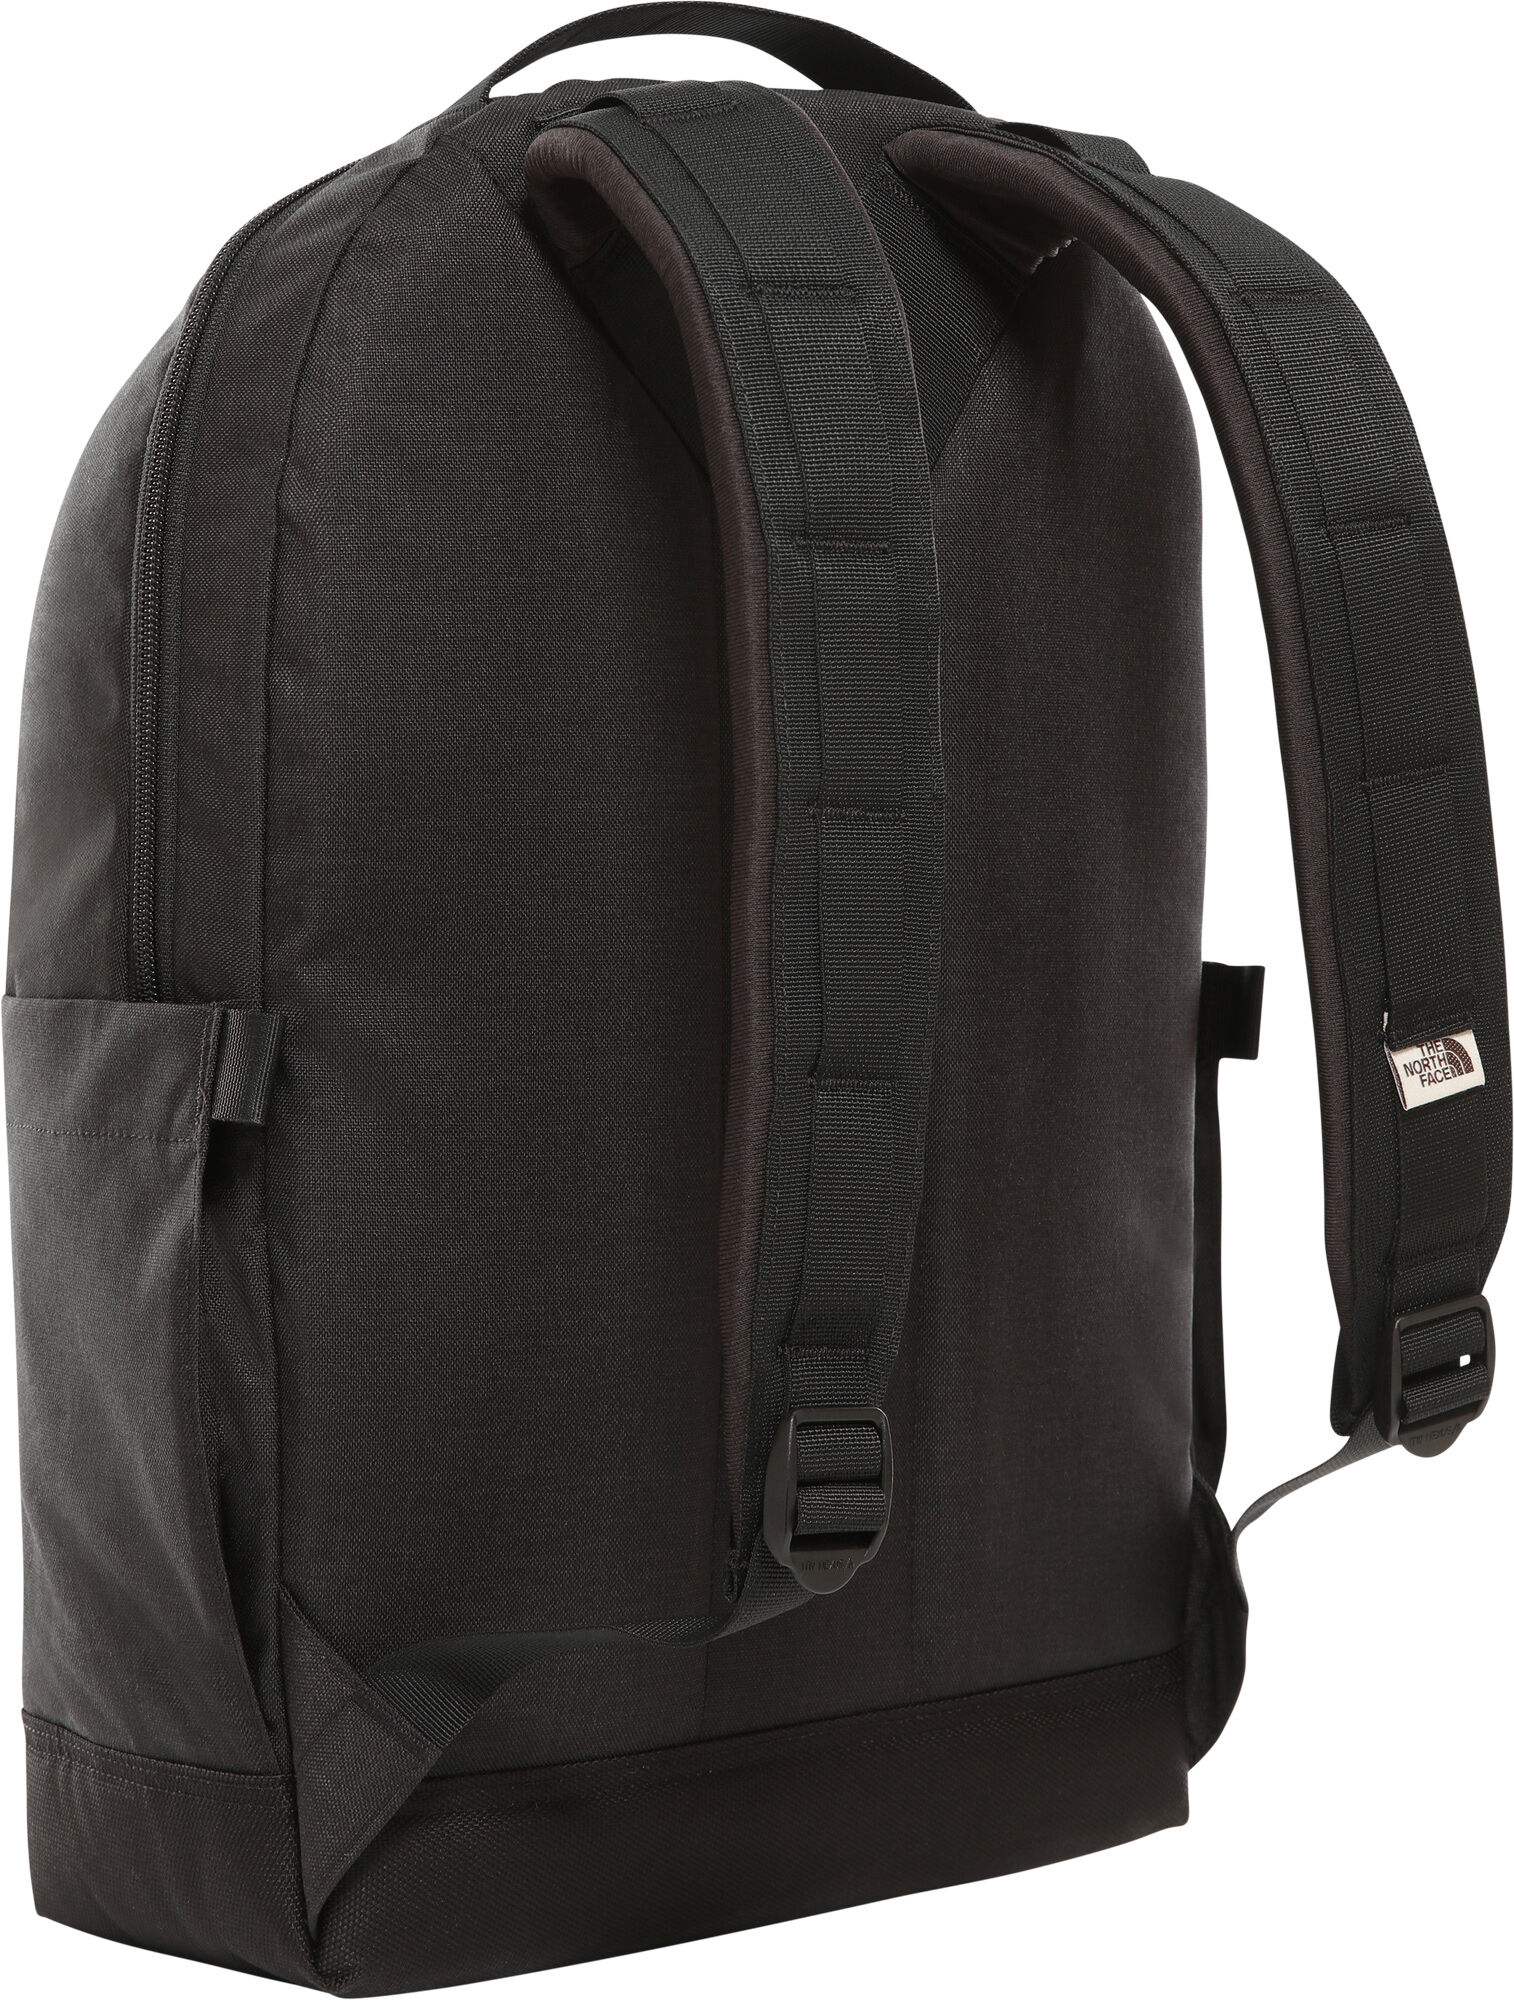 The North Face　DAYPACK 　NF0A3KY5 KS7